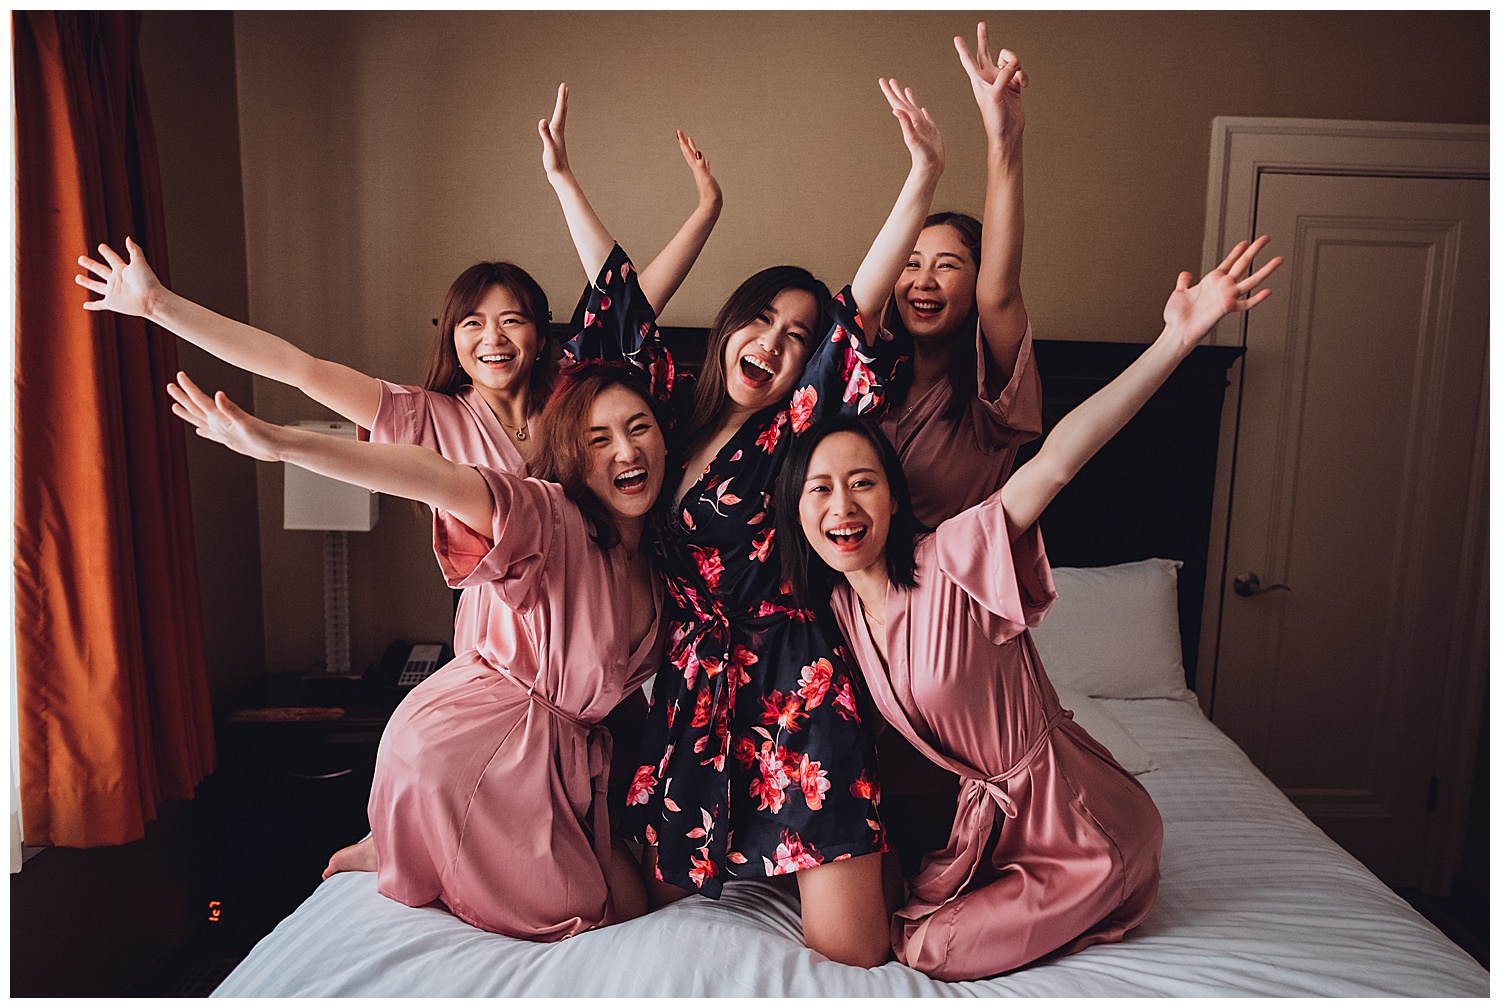 The carleton of Oak Park Wedding getting ready, bride and bridesmaids photo on a bed